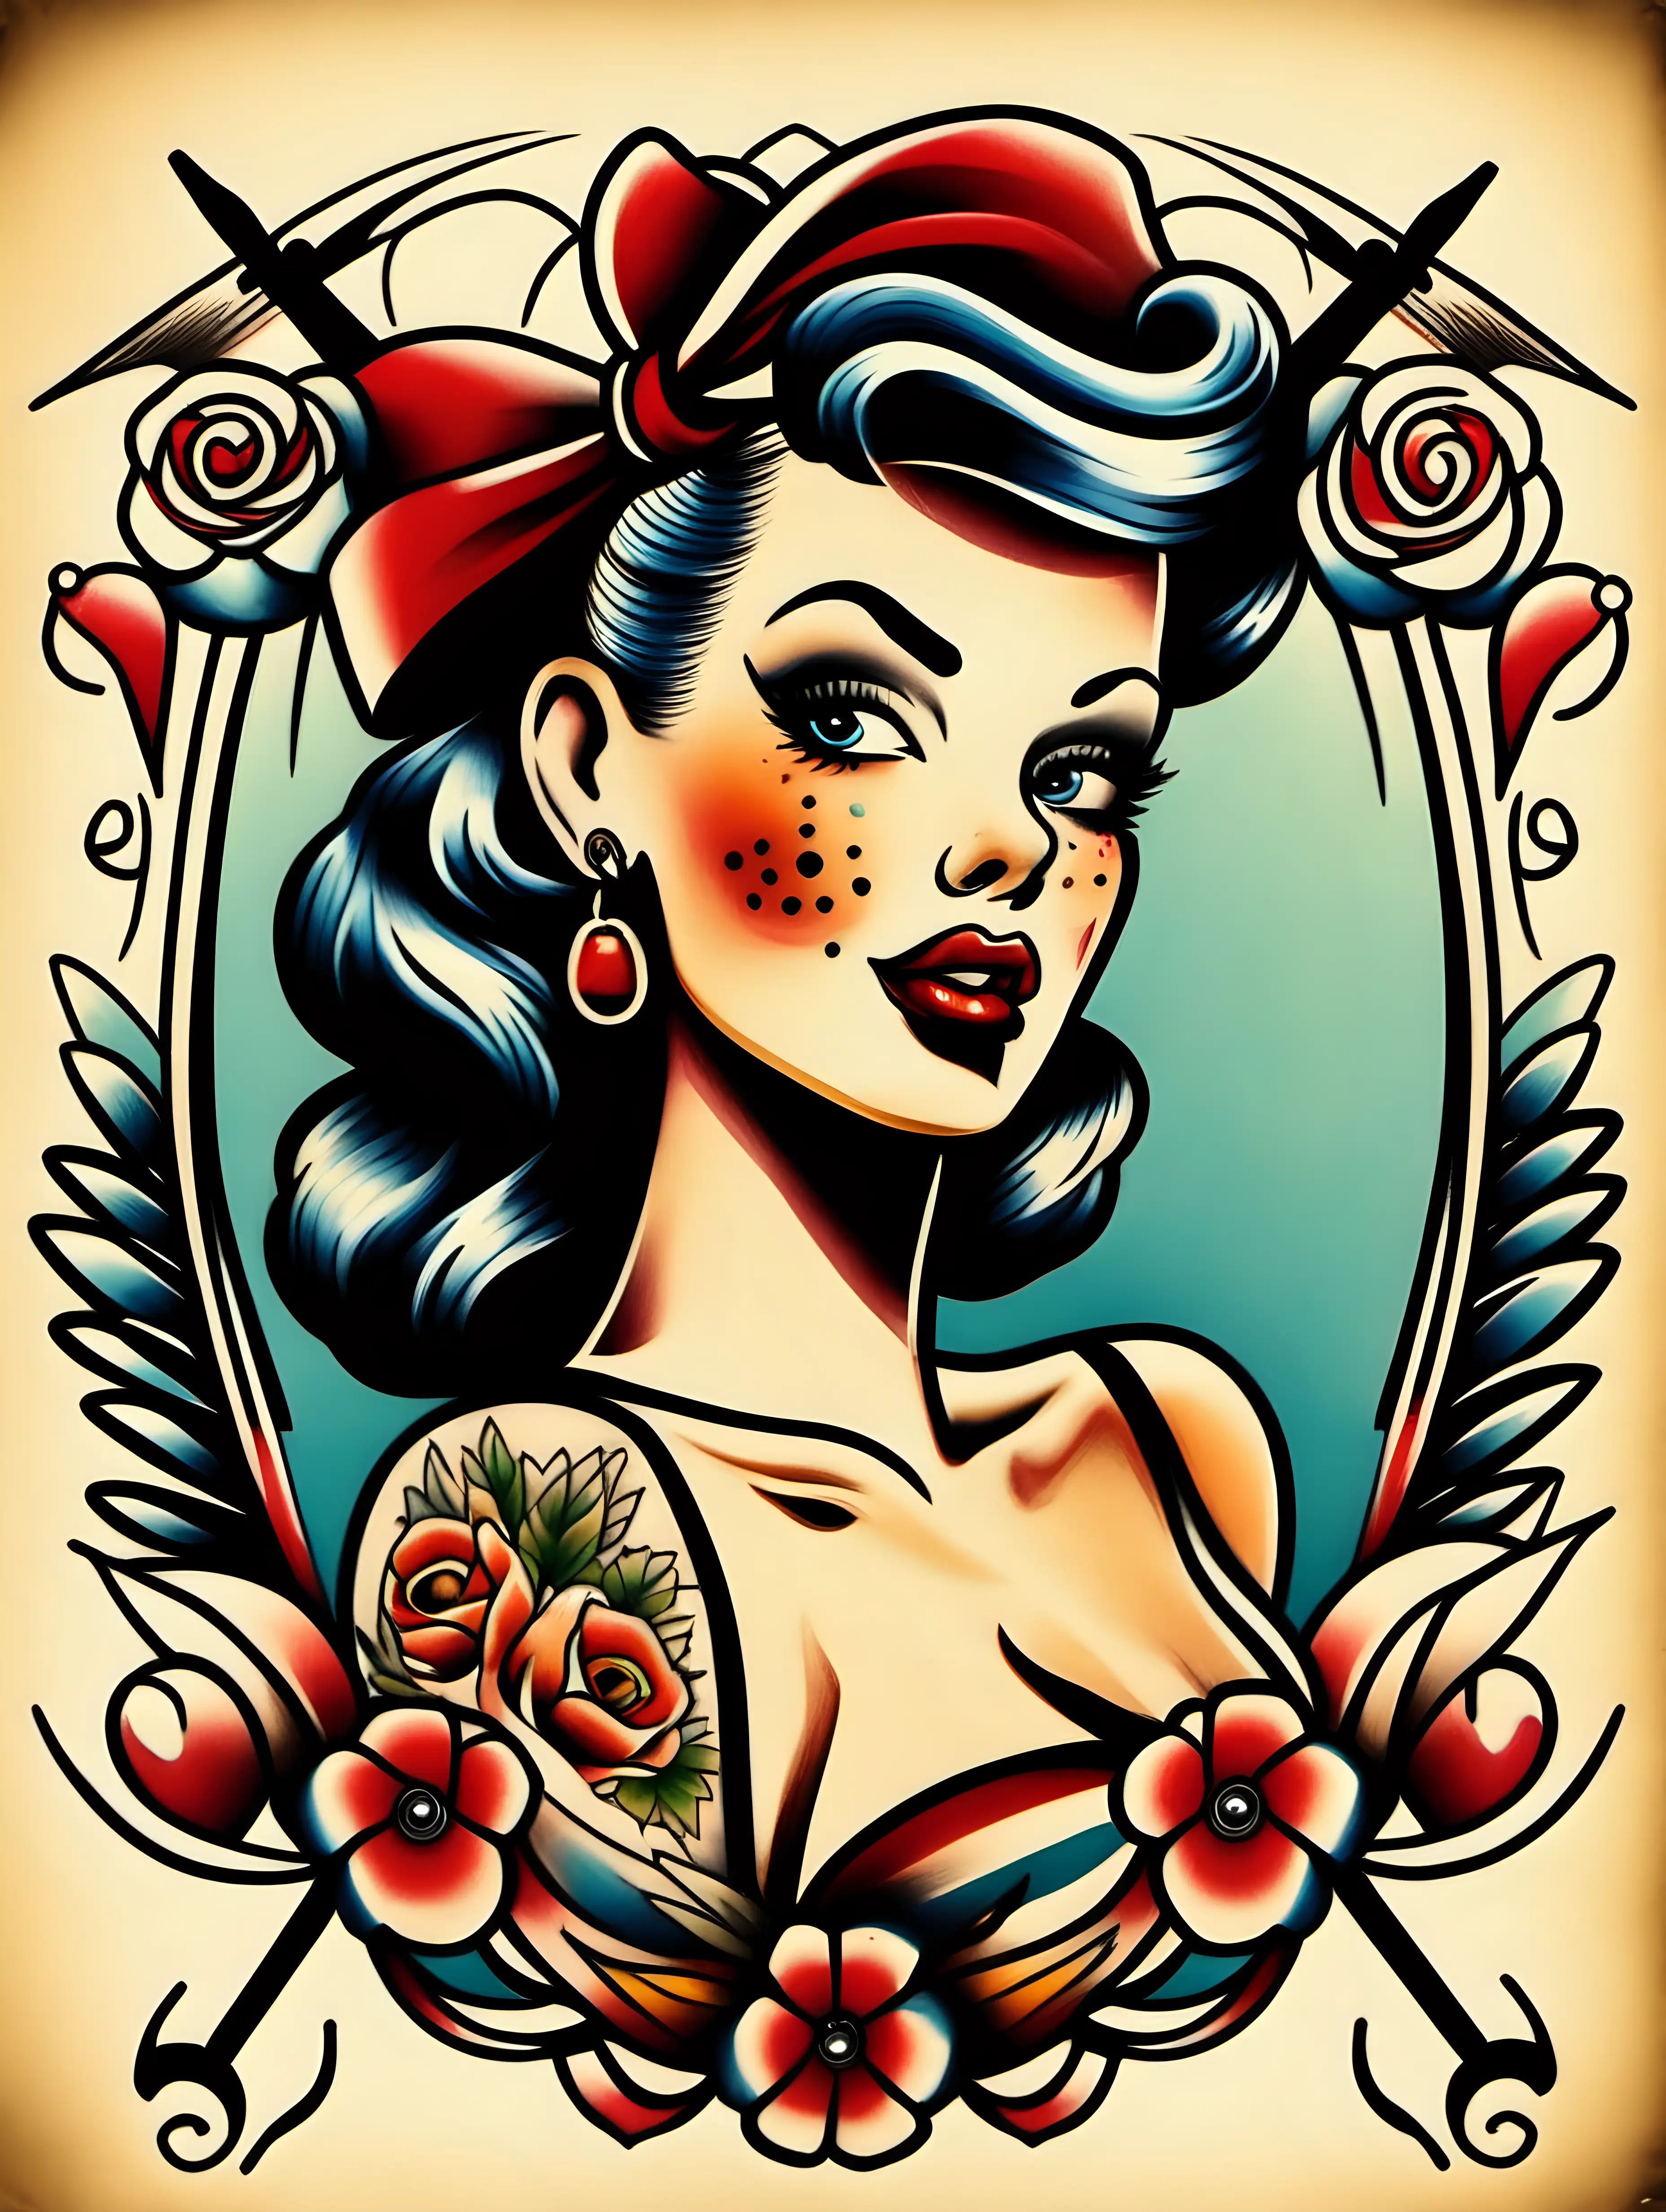 Vintage PinUp Girl Tattoo Art in Traditional Style